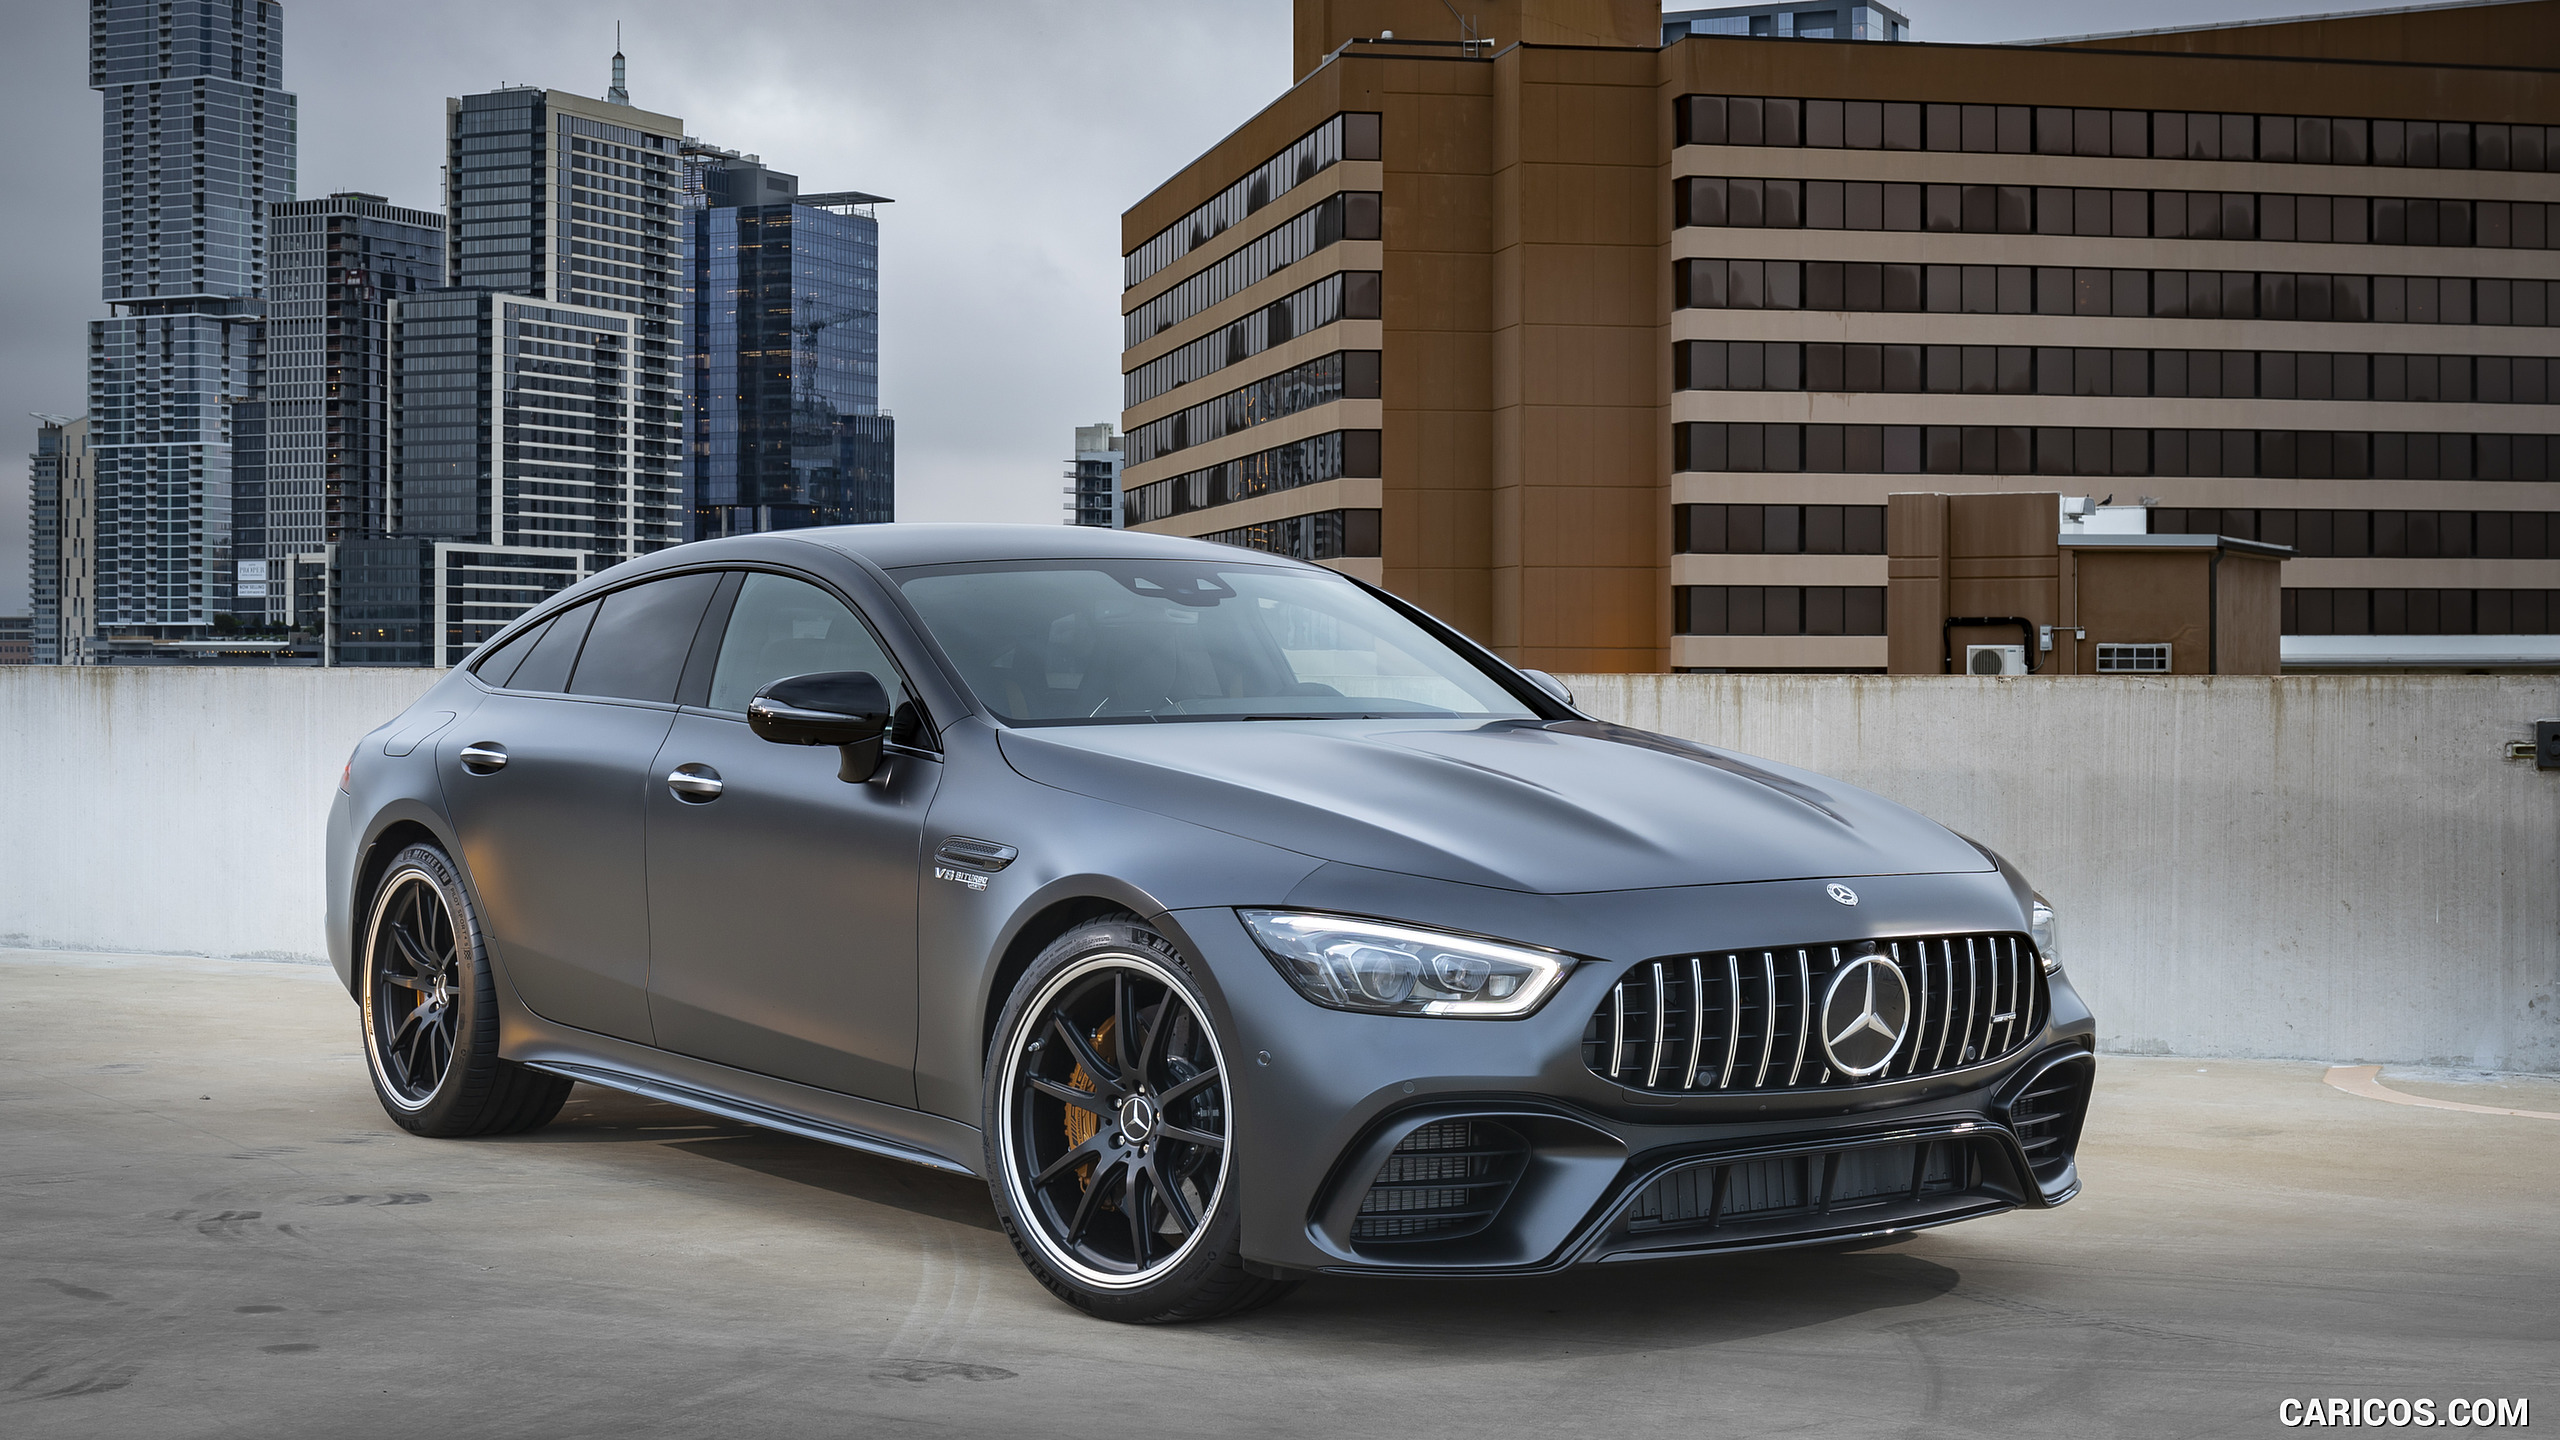 2019 Mercedes-AMG GT 63 S 4MATIC+ 4-Door Coupe - Front Three-Quarter, #206 of 427